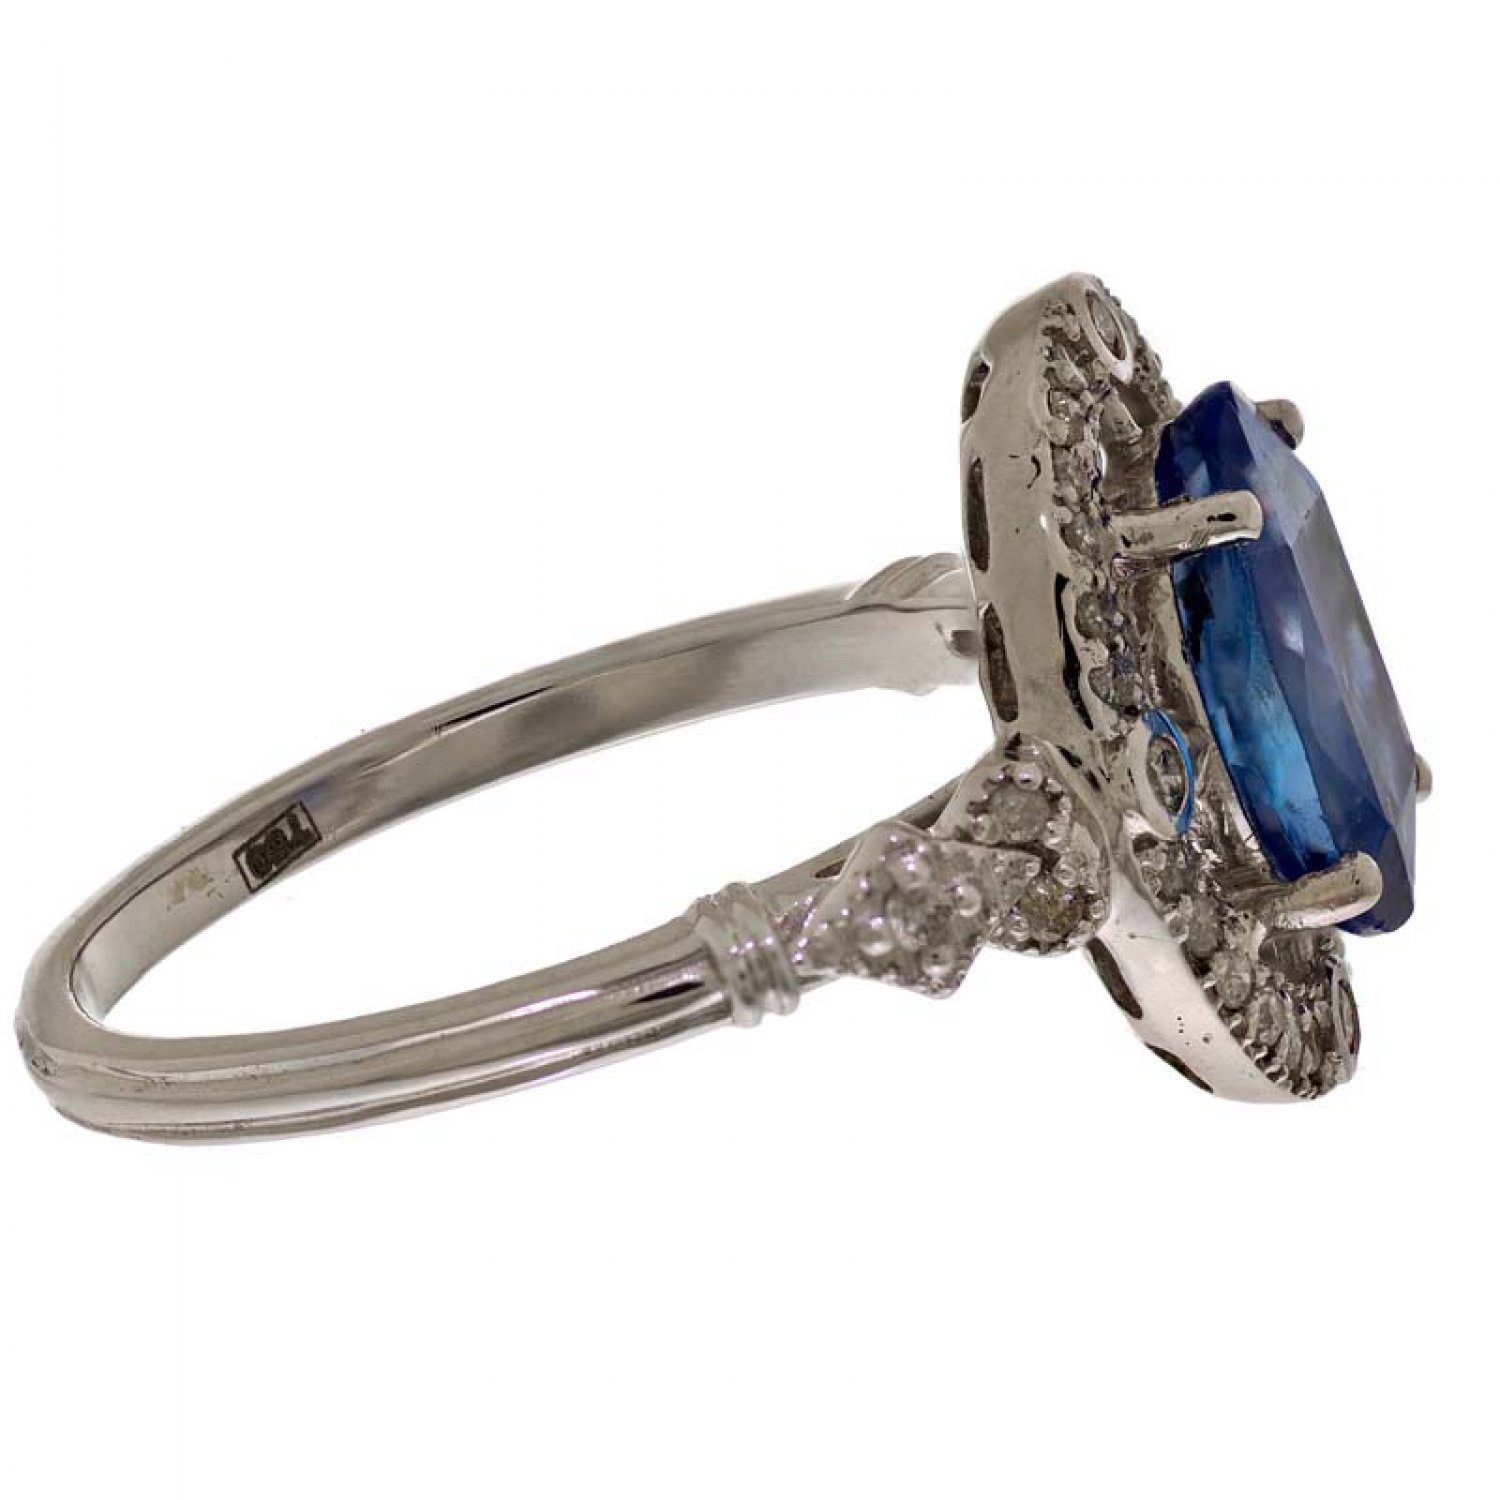 18ct White Gold Sapphire and Diamond Ring (RM102)